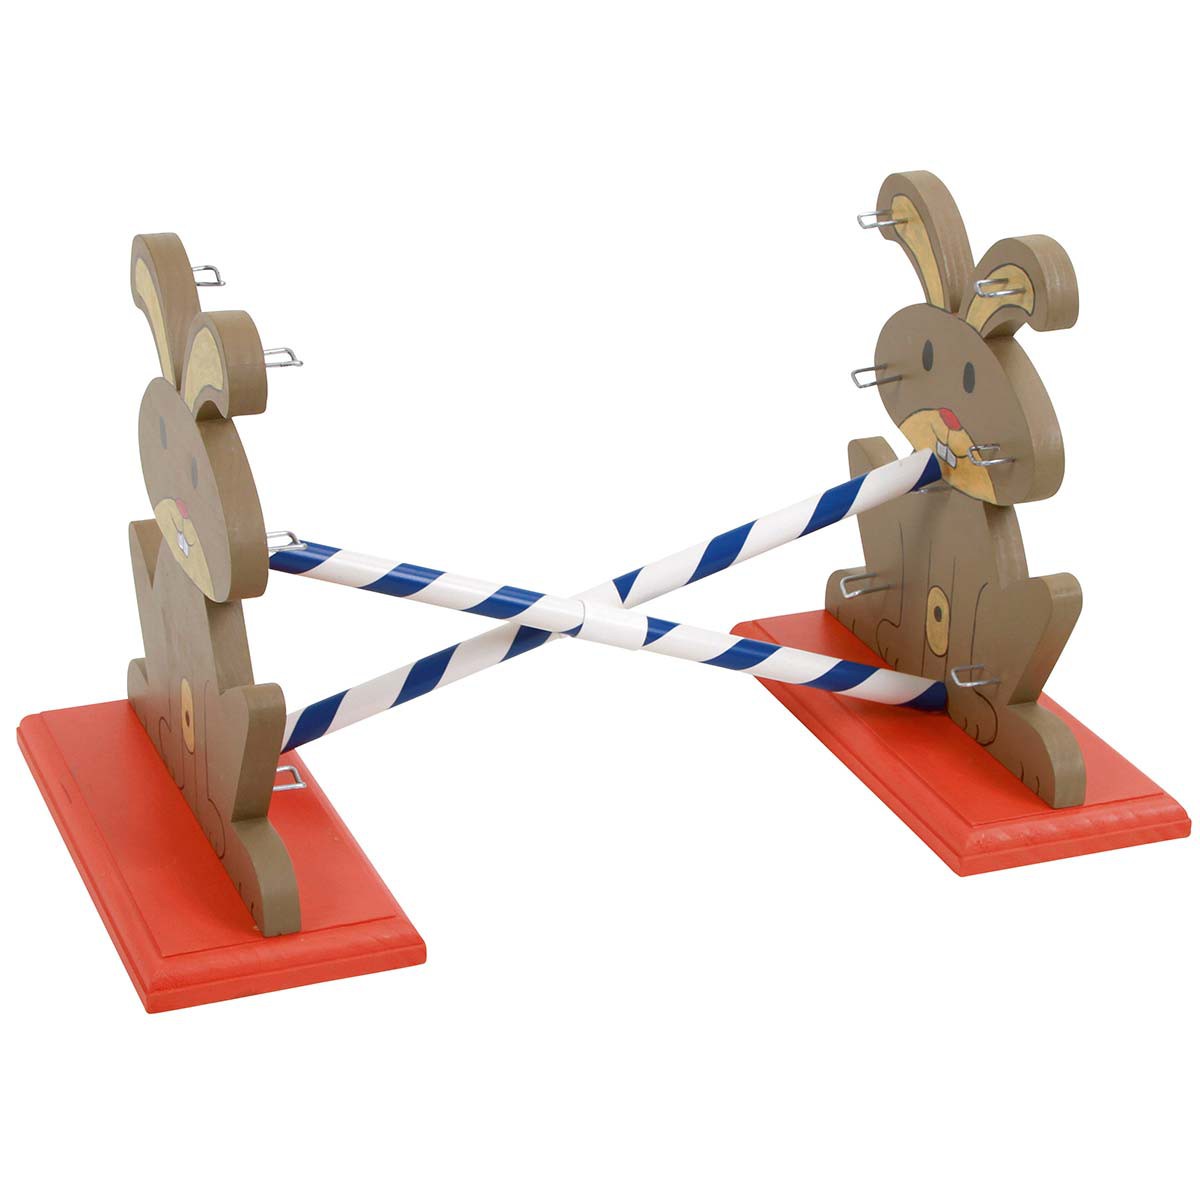 Agility Rodent Obstacles 62 x 33 x 34 cm